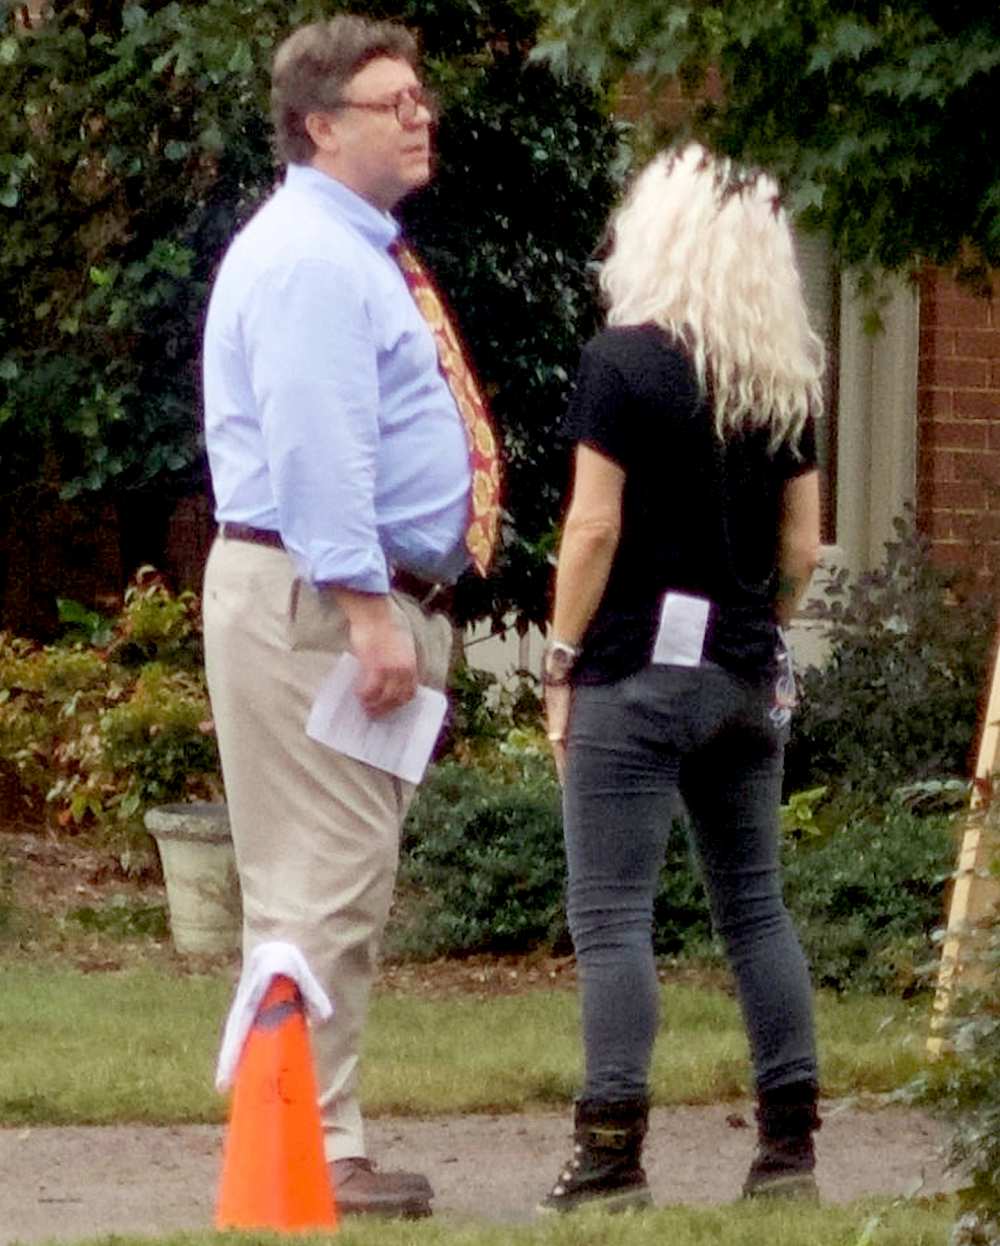 Russell Crowe was spotted filming 'Boy Erased' on a rainy day in Atlanta.